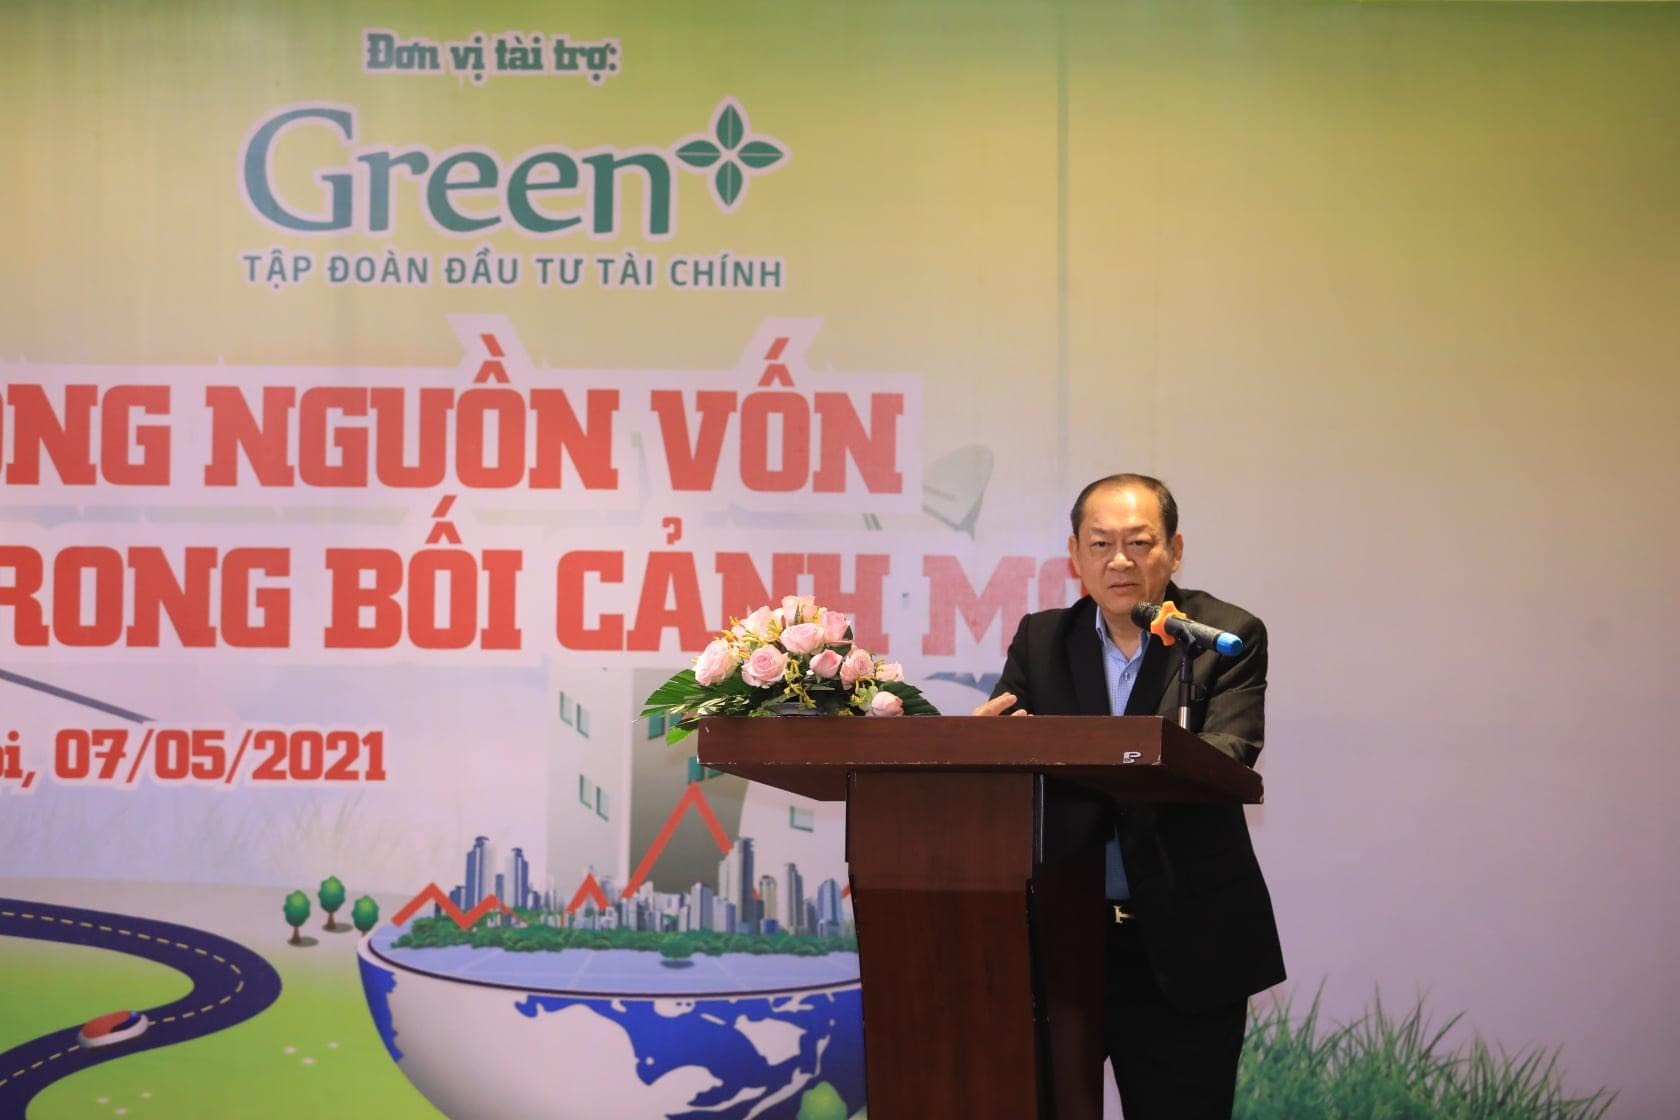 Mr. Dang Duc Thanh – President of VEC – speaking at the Workshop